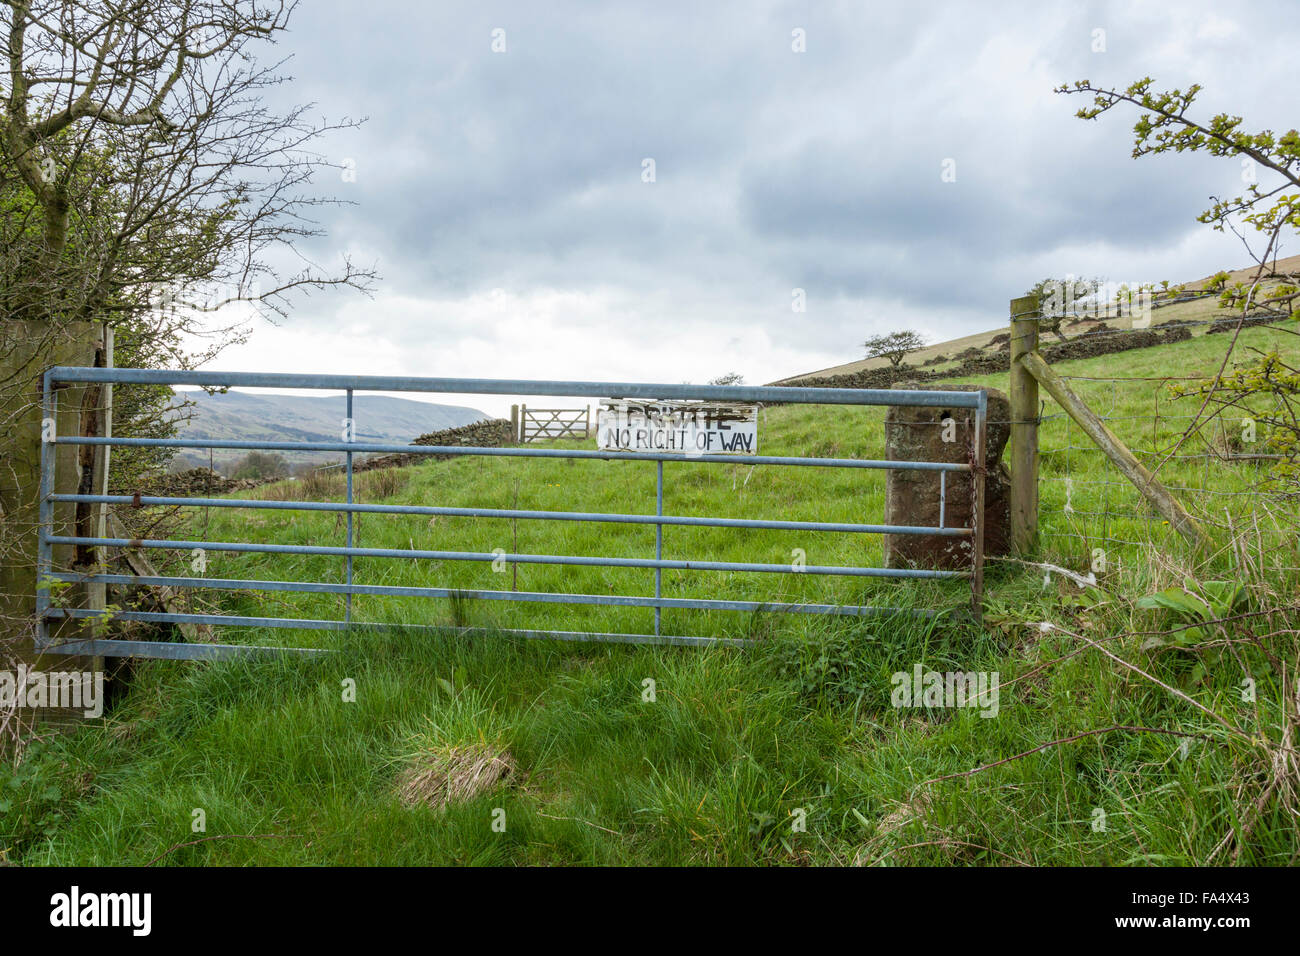 Private land. Farm gate with Private No Right Of Way sign, Derbyshire, Peak District, England, UK Stock Photo